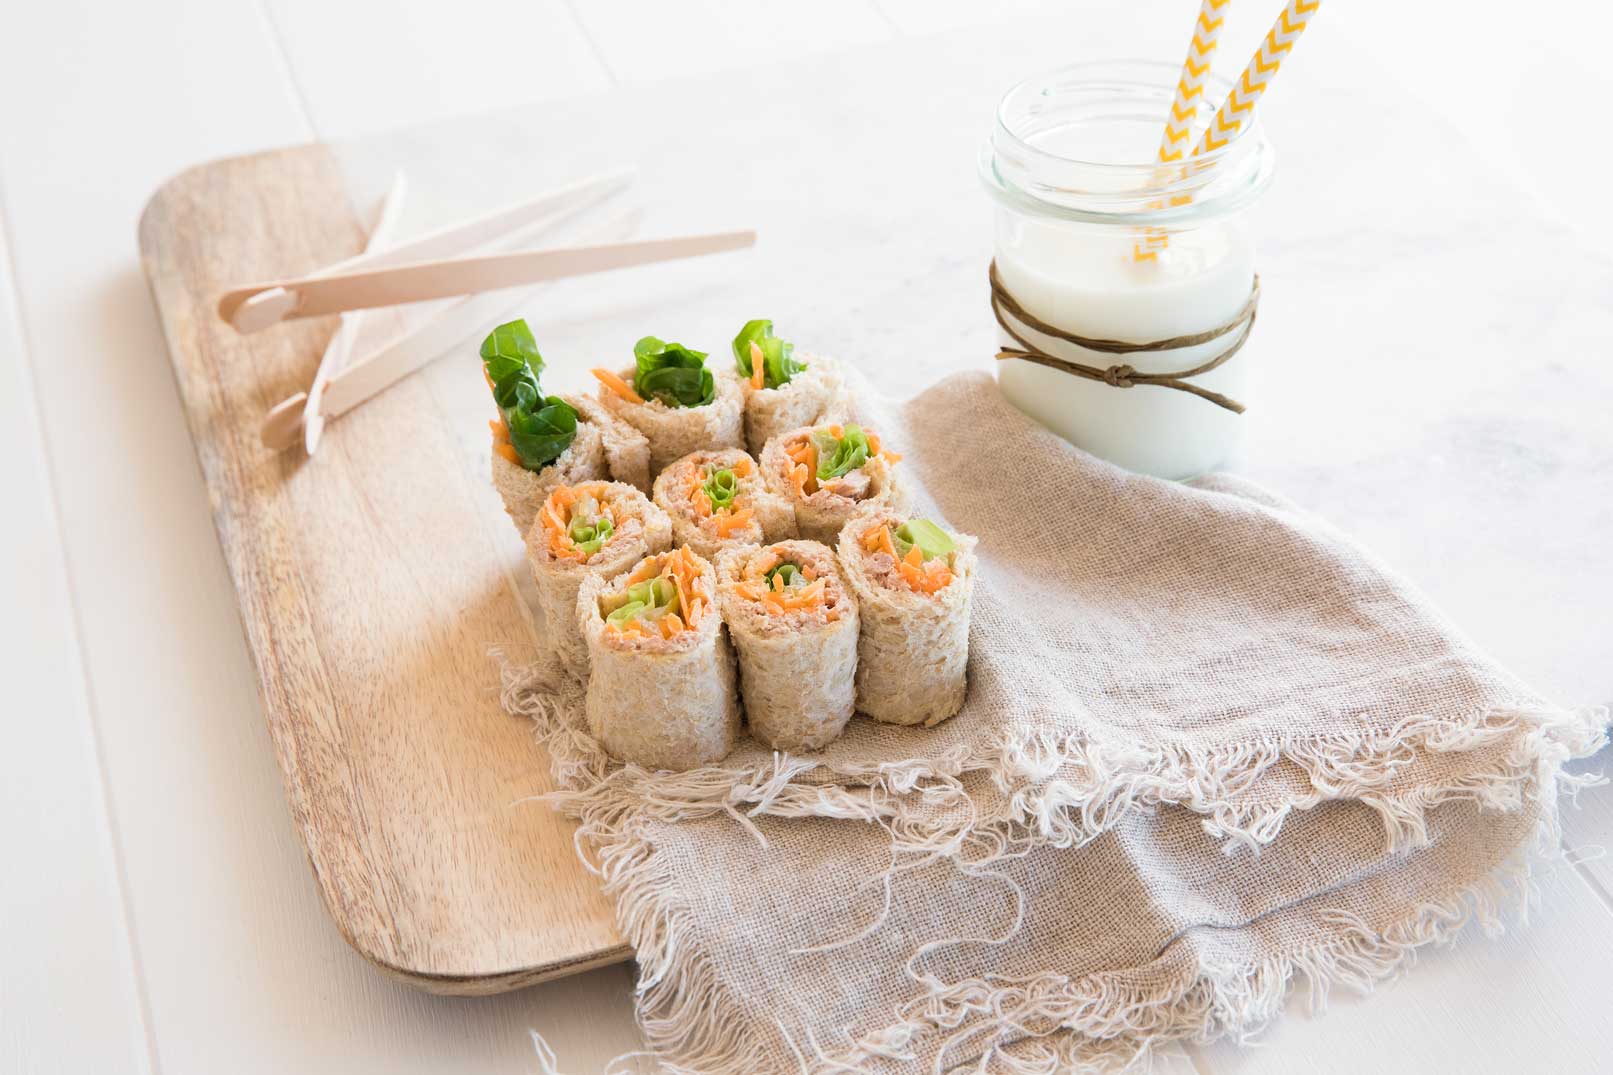 Nine bread sushi rolls served on a wooden chopping board with chopsticks and a jar of milk with two straws on the side.